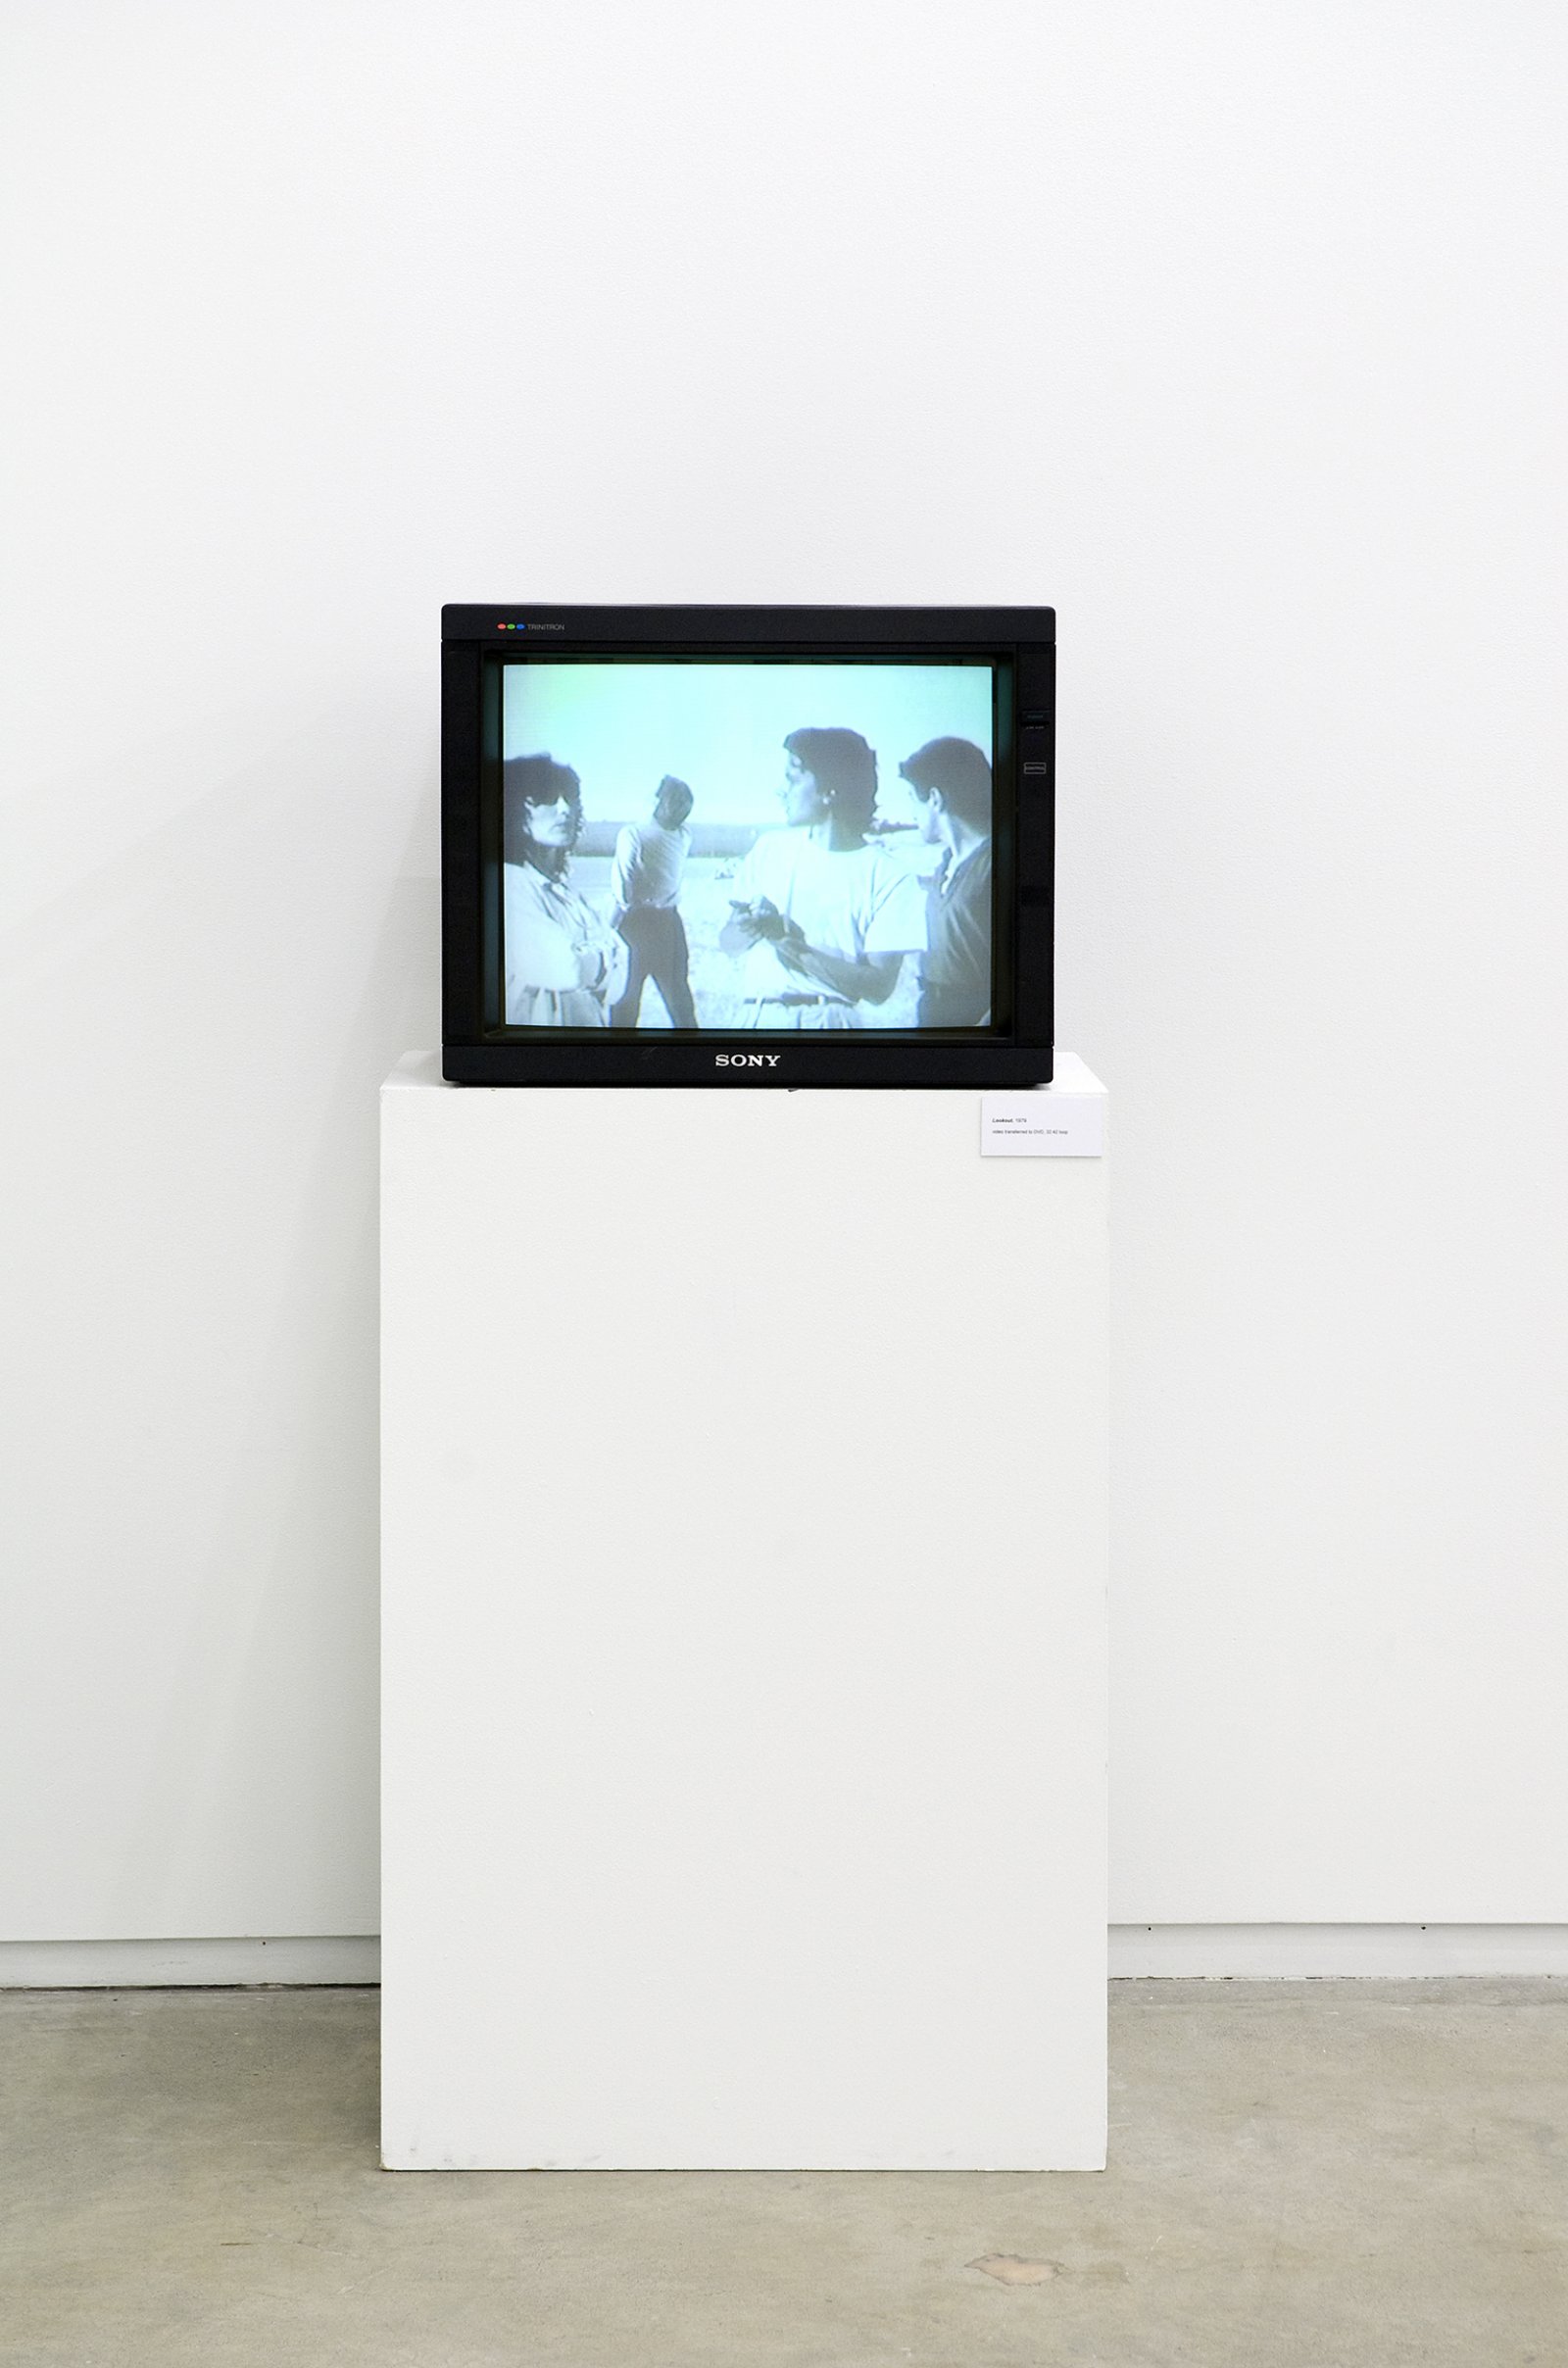 Ian Wallace, Lookout, 1979, 3/4 inch video transferred to DVD, 32 minutes, 42 seconds looped